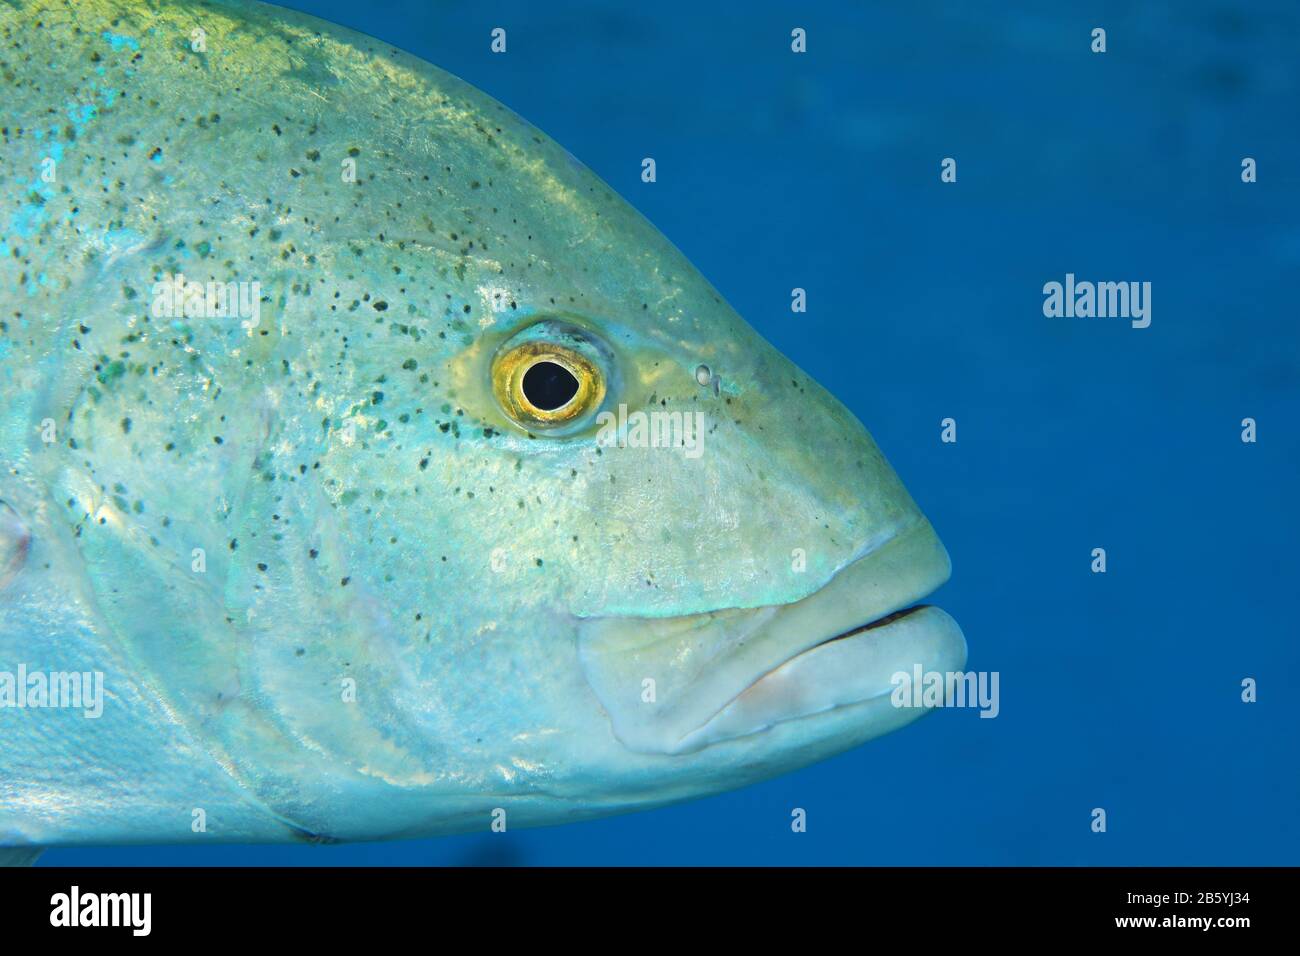 Bluefin trevally fish (Caranx melampygus) underwater in tropical waters of the Maldives Stock Photo